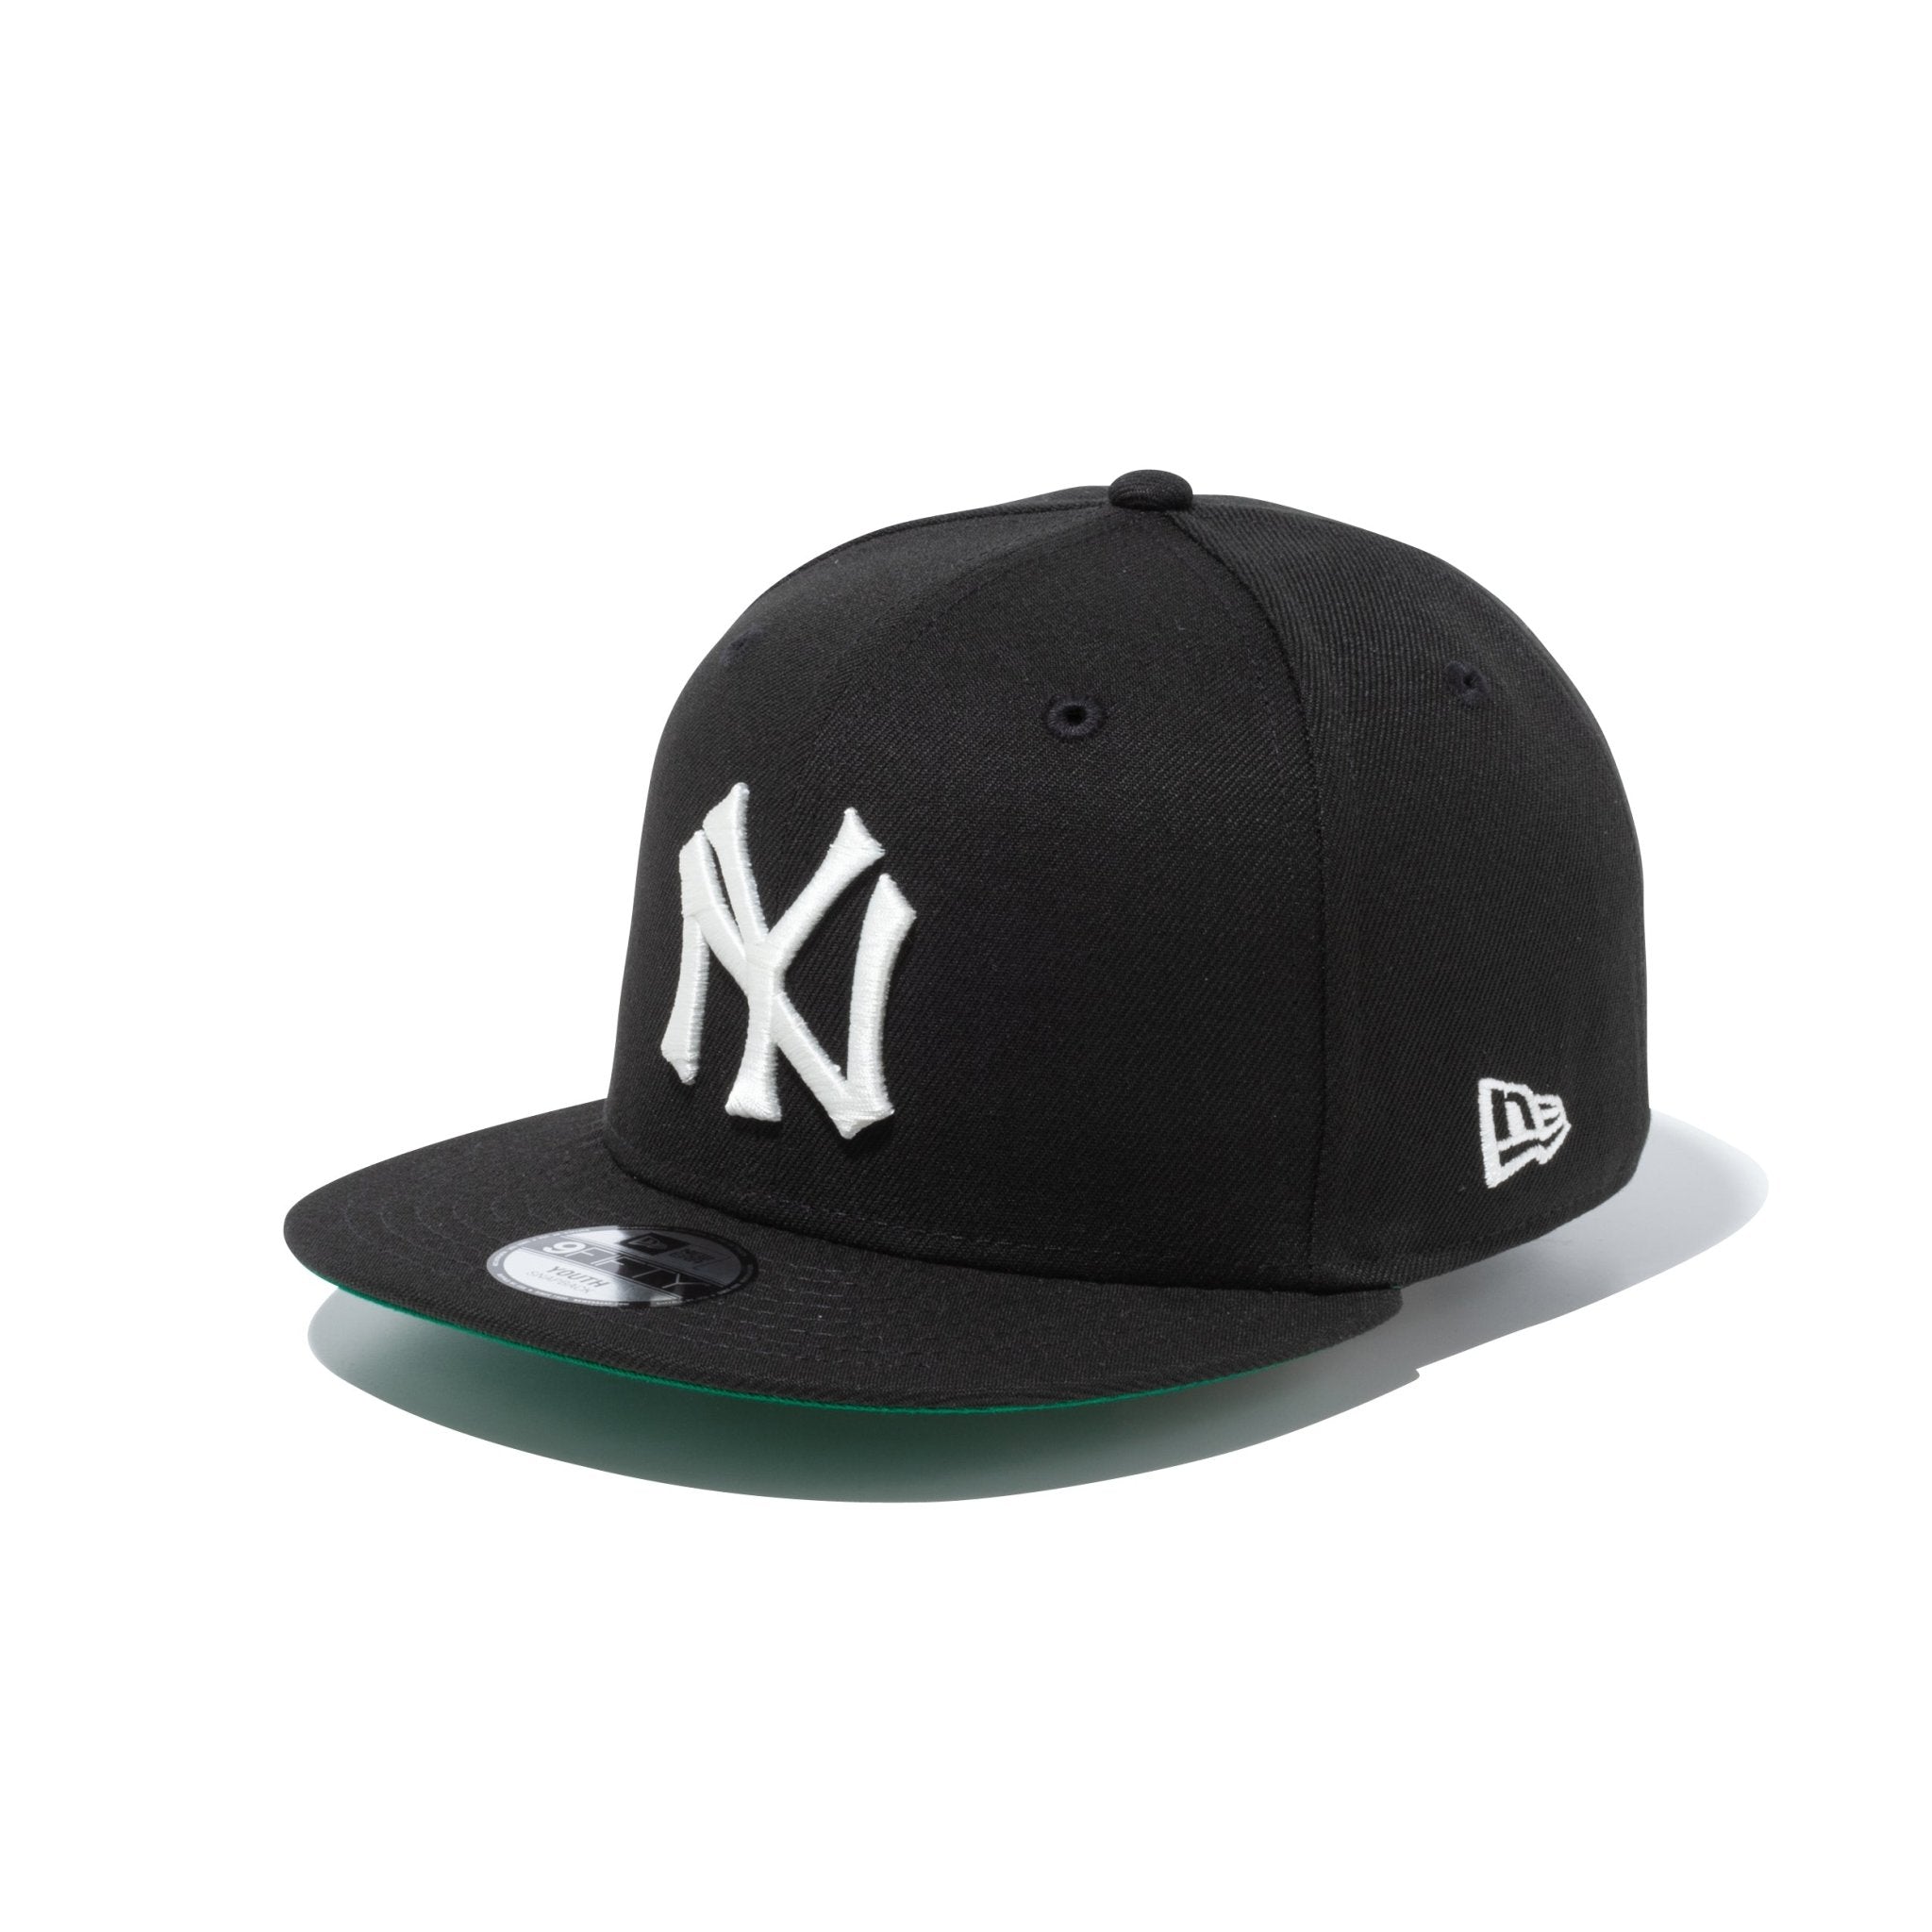 Youth 9FIFTY Cooperstown クーパーズタウン ニューヨーク・ヤンキース ...